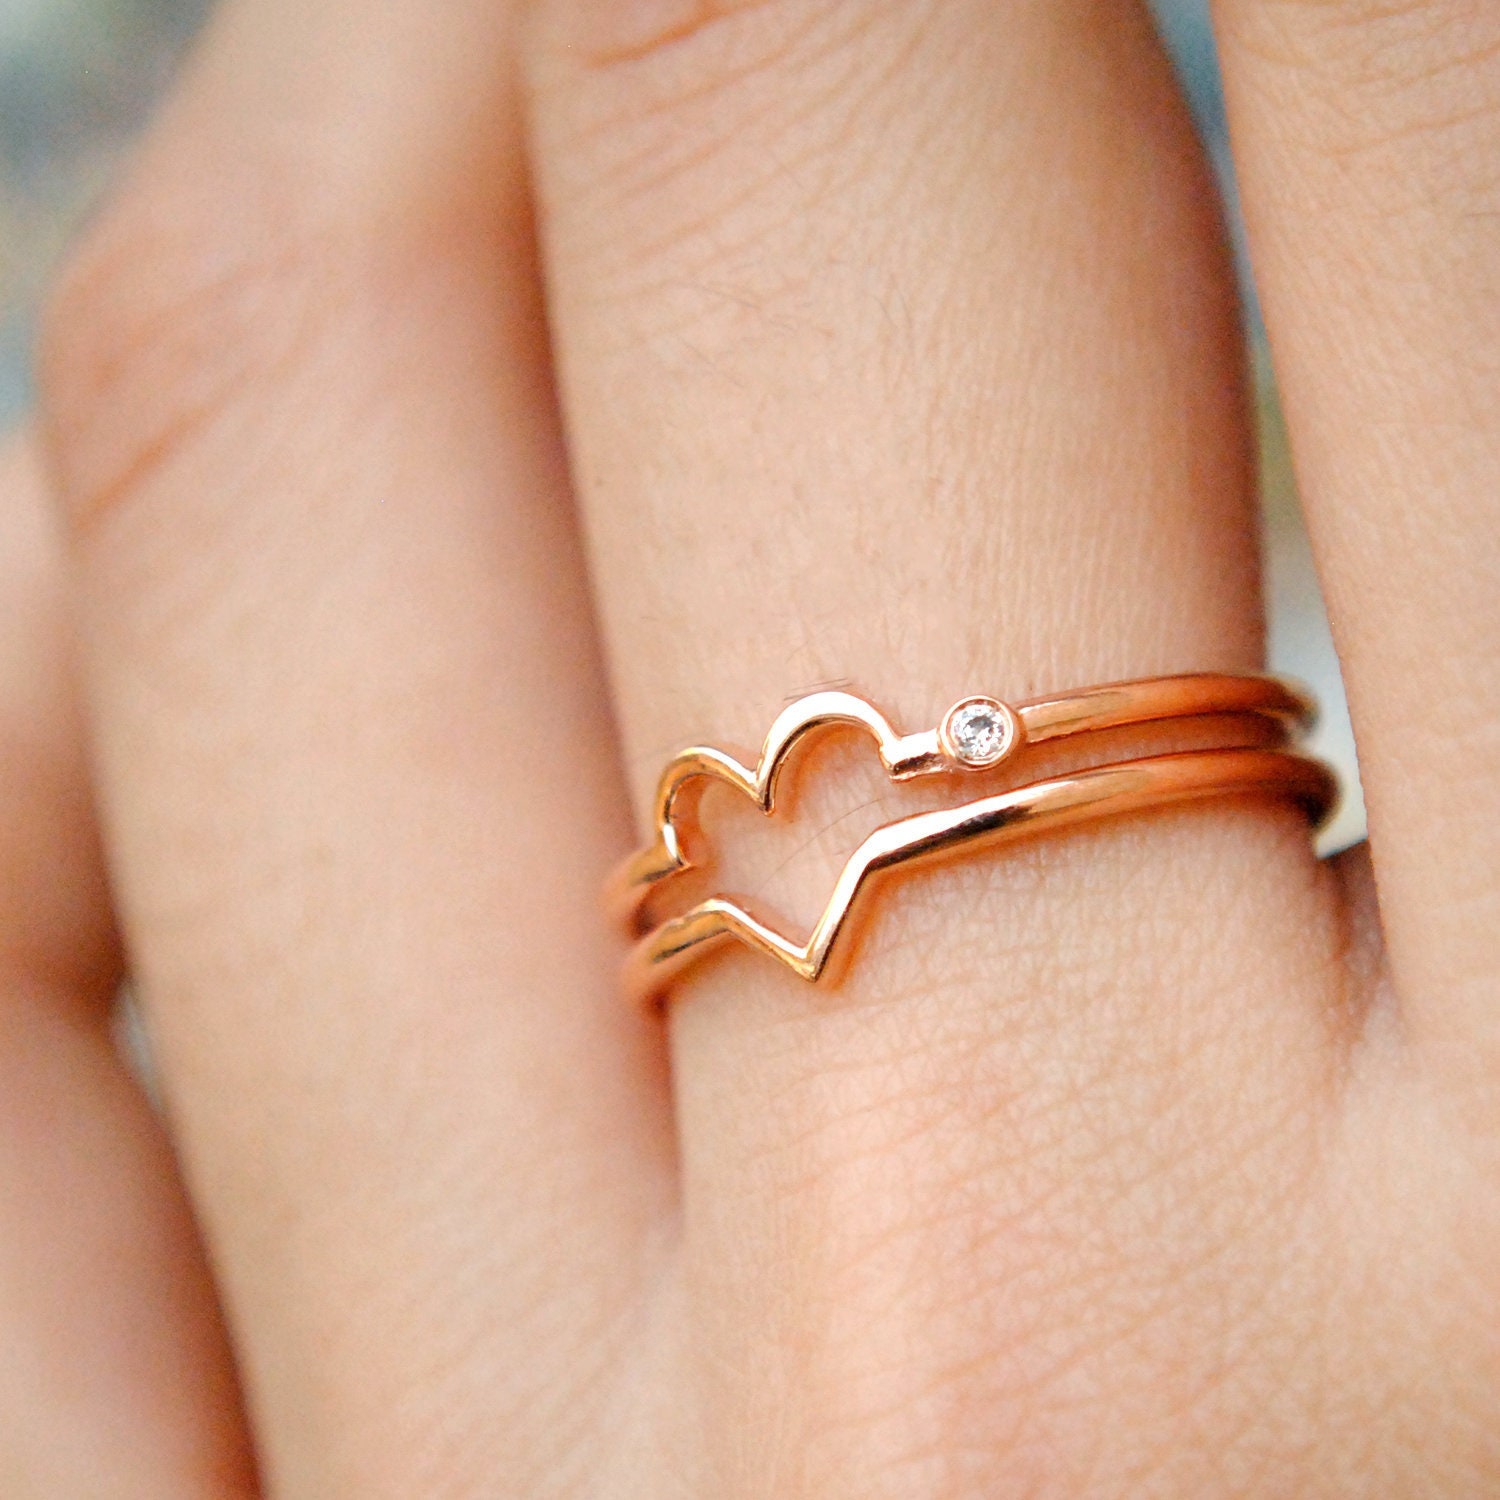 Two Intertwined Hearts Diamond Ring in 14K Gold